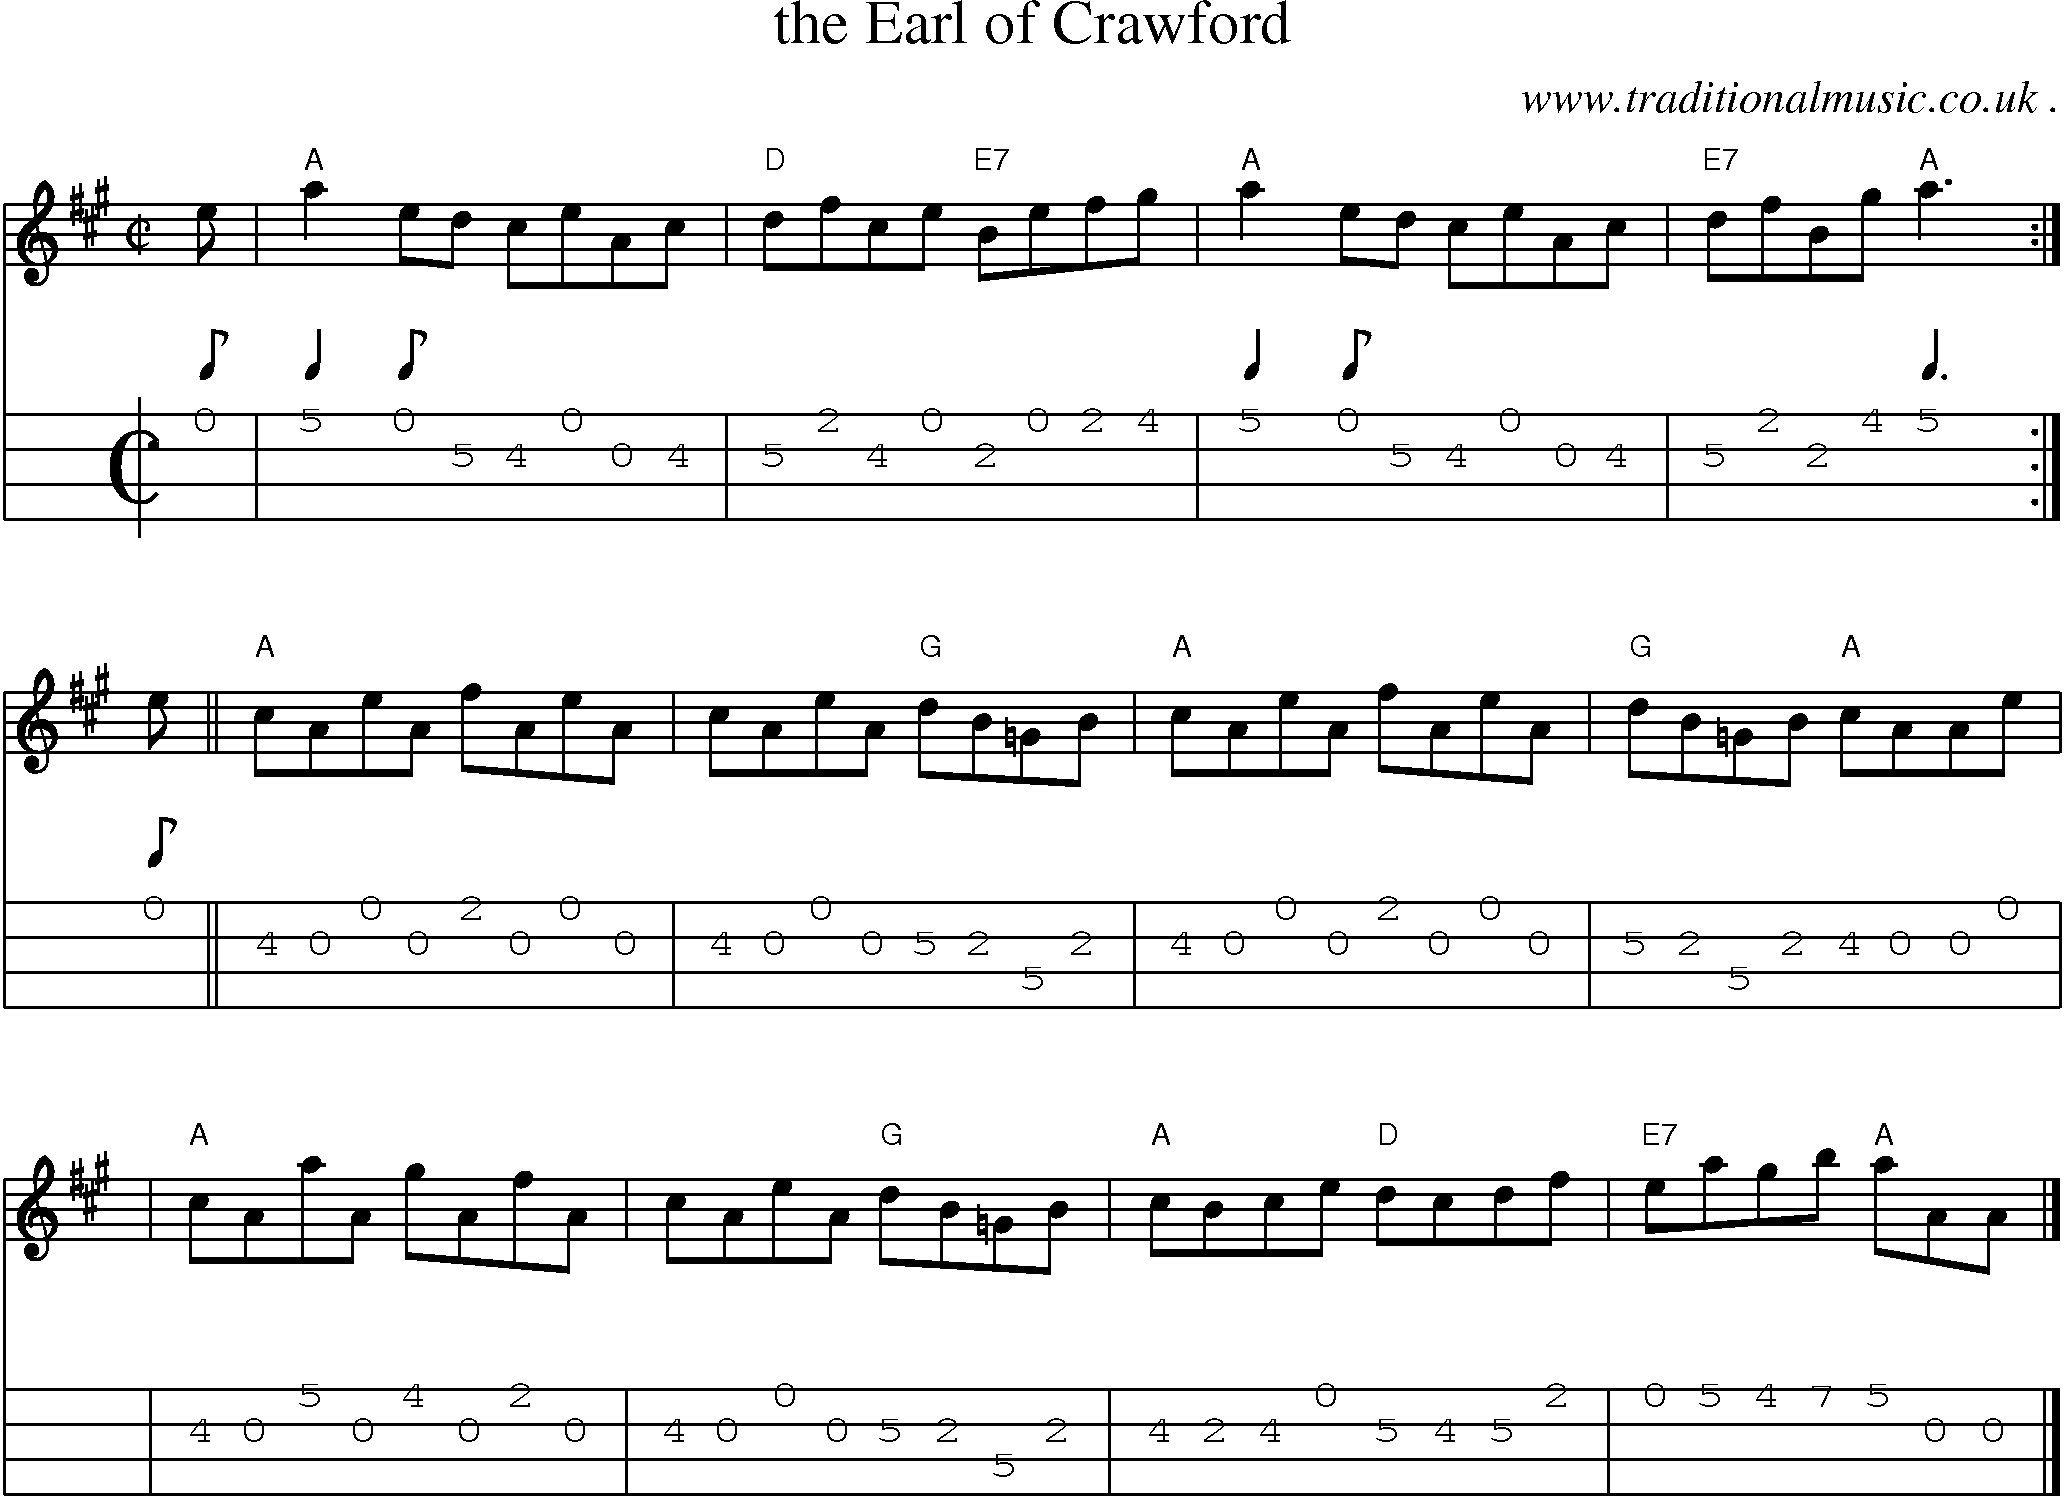 Sheet-music  score, Chords and Mandolin Tabs for The Earl Of Crawford